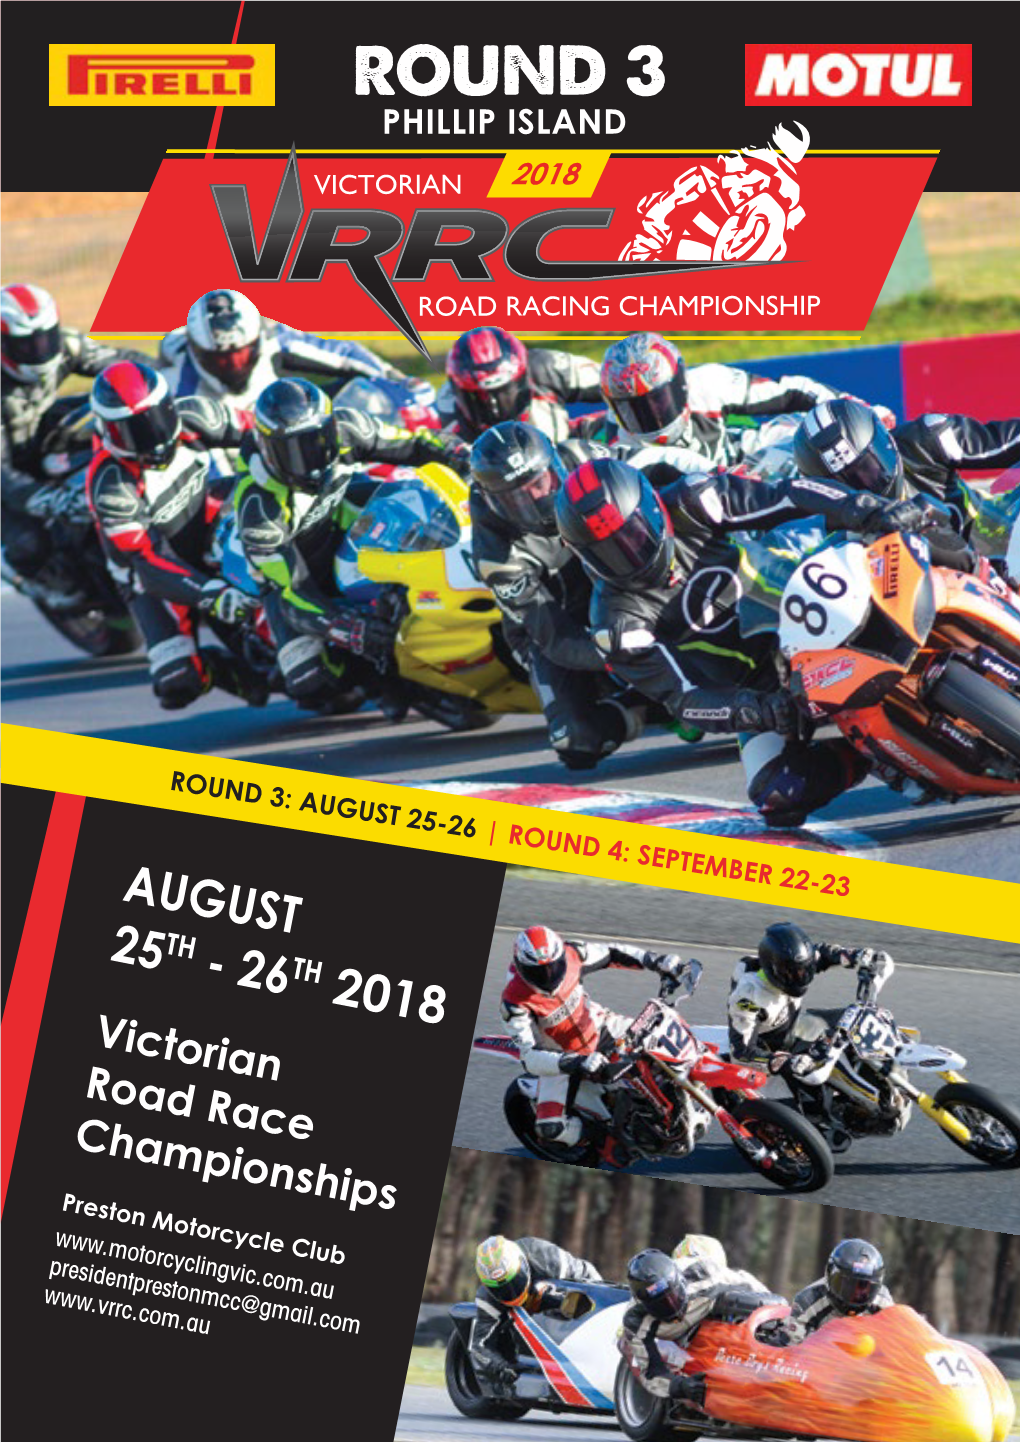 26TH 2018 Victorian Road Race Championships